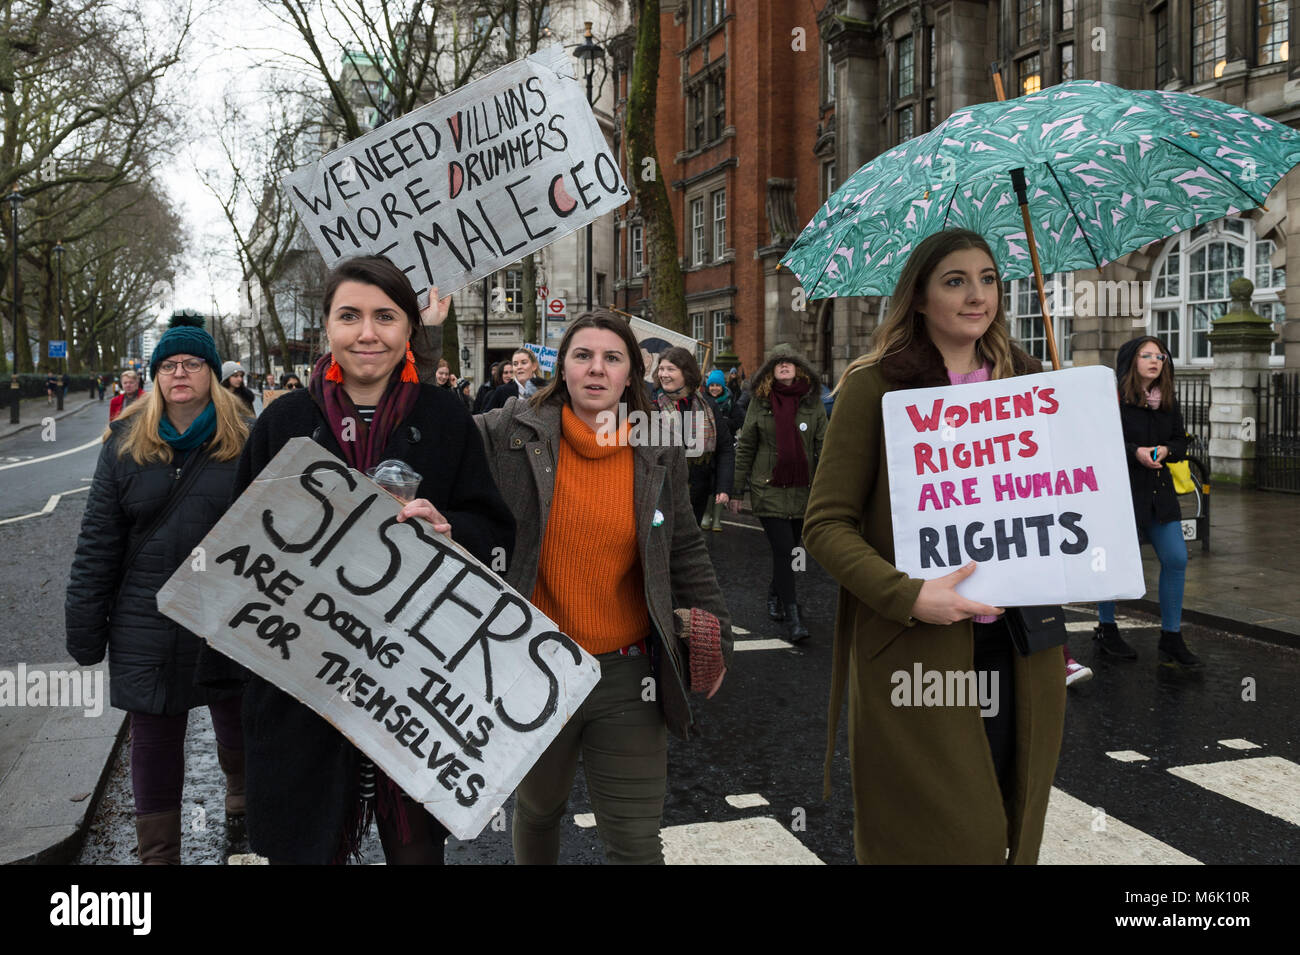 London, UK. 4th March, 2018. Thousands of people including politicians, celebrities and activists gather outside the Houses of Parliament in London to take part in March4Women, an annual event to celebrate International Women's Day and 100 years since women in the UK first gained the right to vote. The event, organised by CARE International, aims to highlight inequality faced by women and girls around the world and campaign for gender equality and women's rights worldwide. Credit: Wiktor Szymanowicz/Alamy Live News Stock Photo